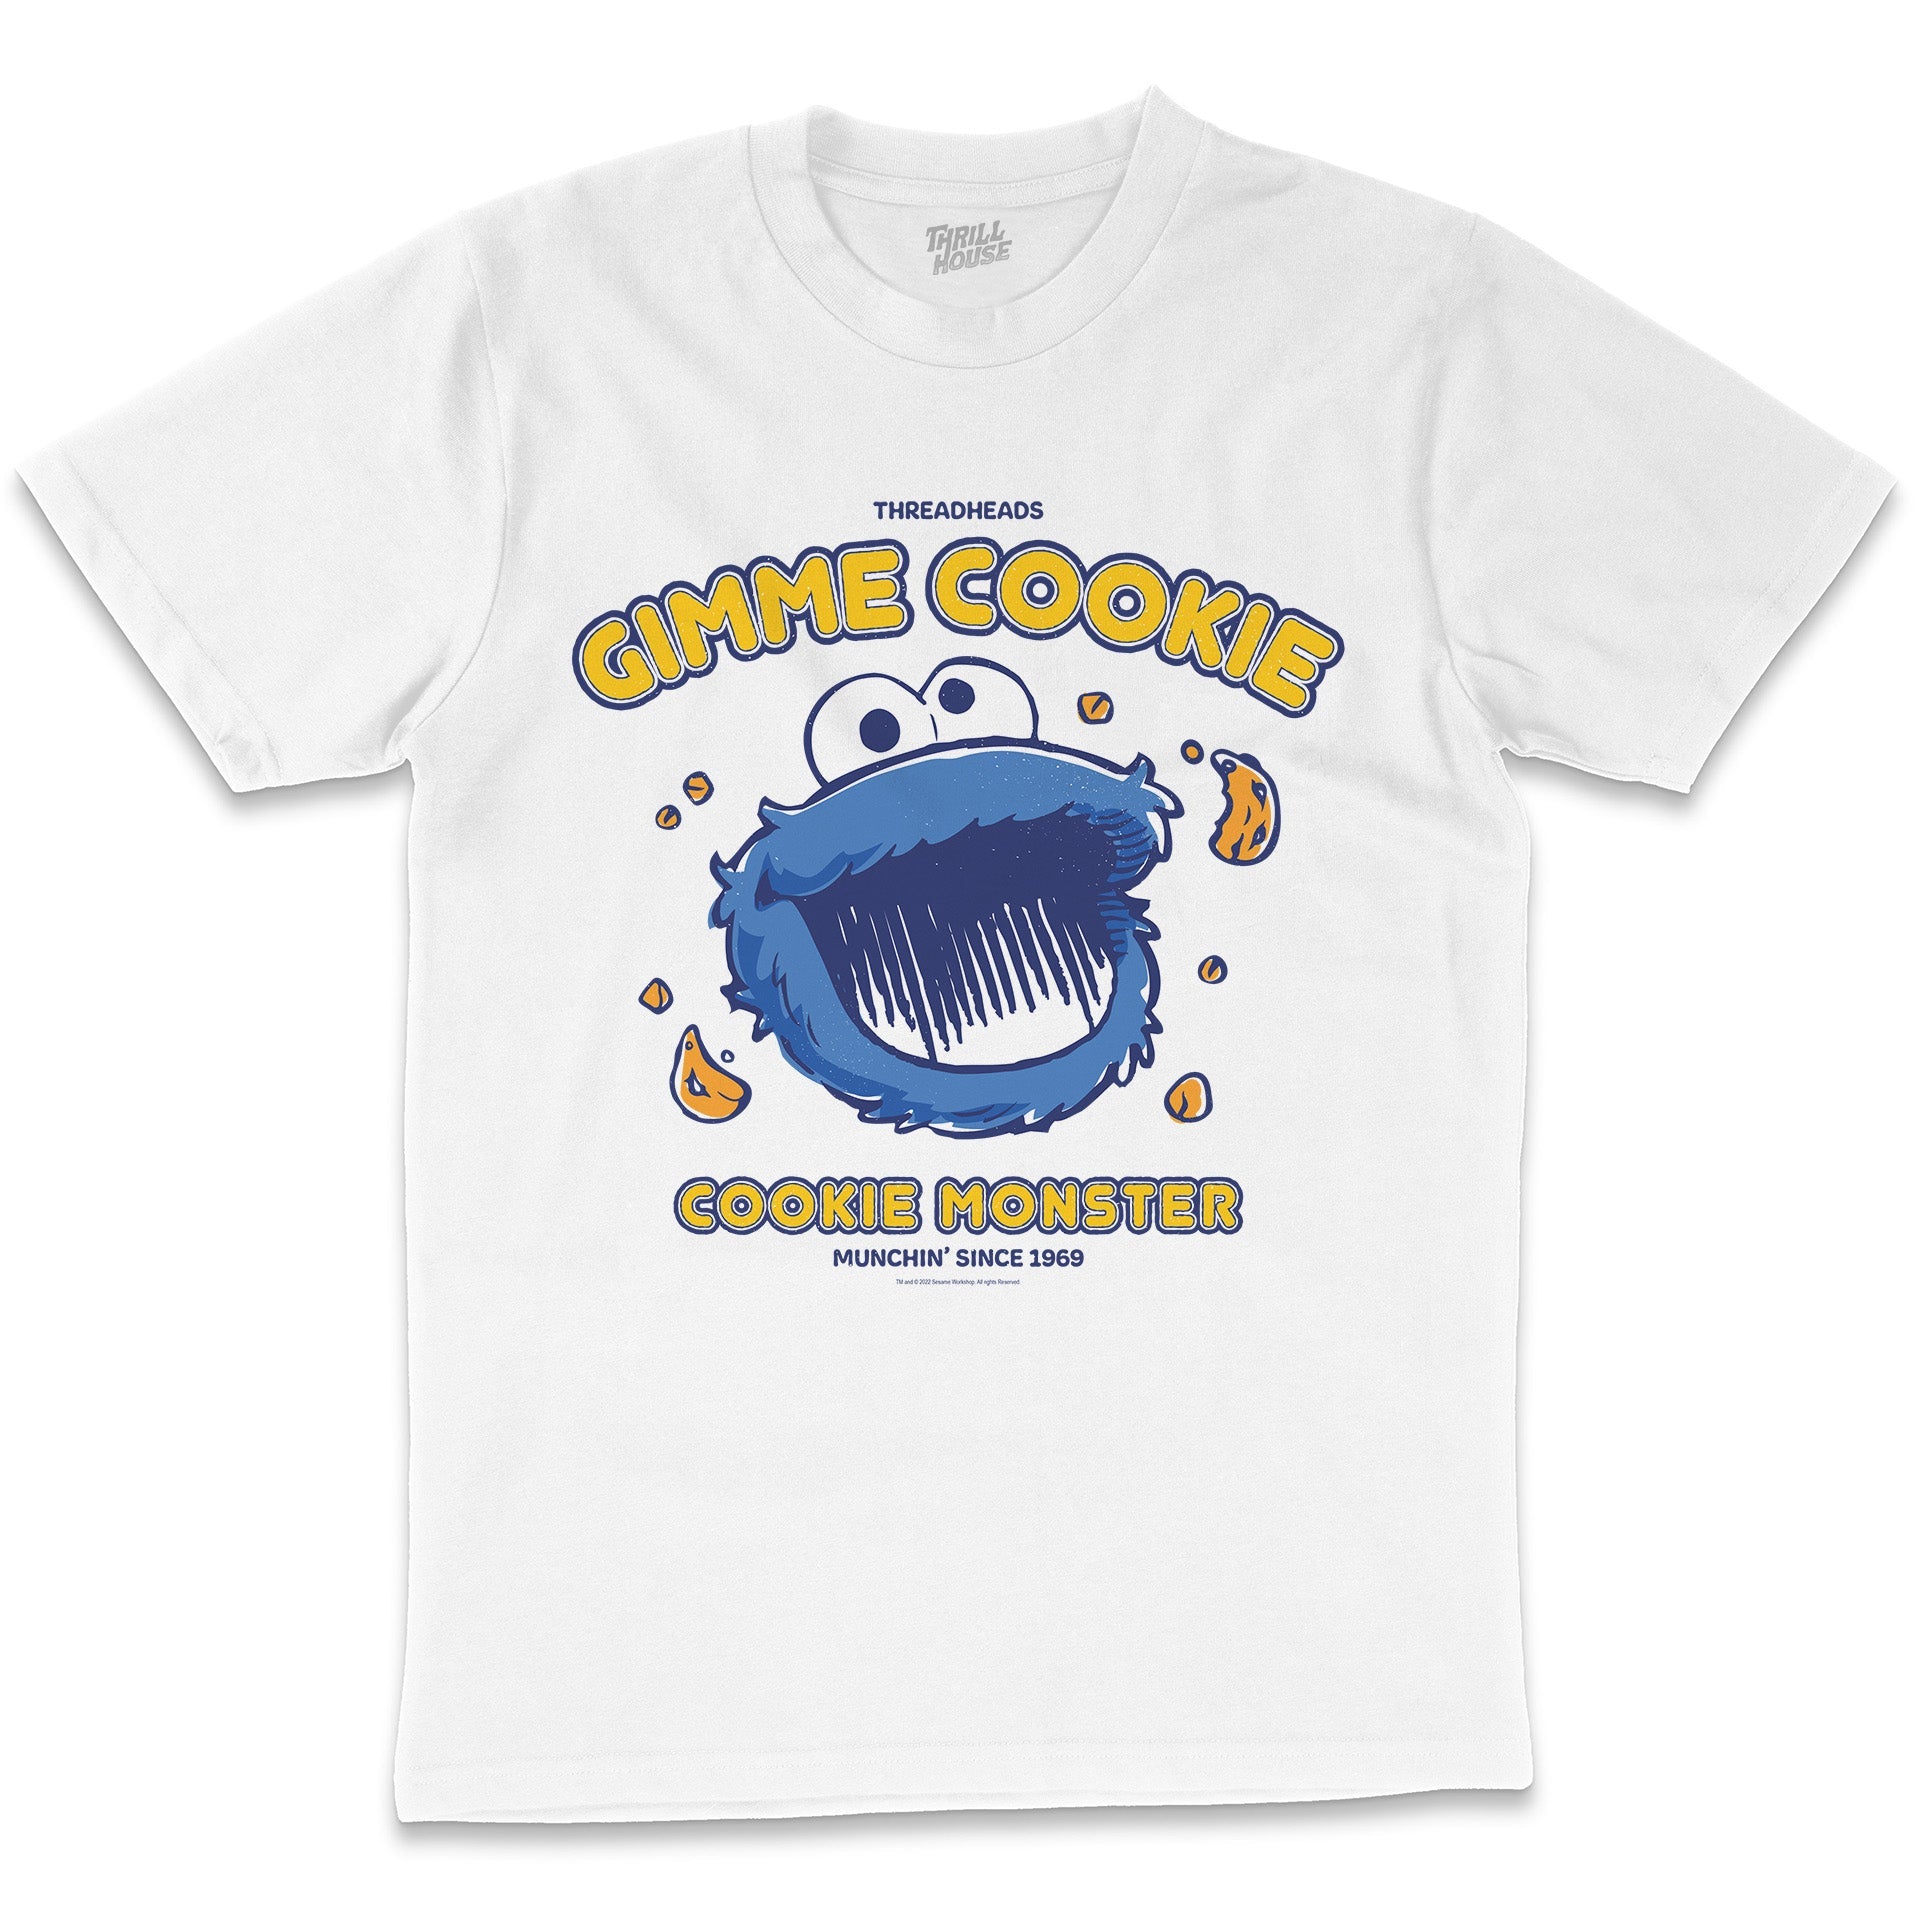 Sesame Street Cookie Monster Gimme Cookie Classic Retro Vintage Educational Puppet TV Program Officially Licensed T-Shirt